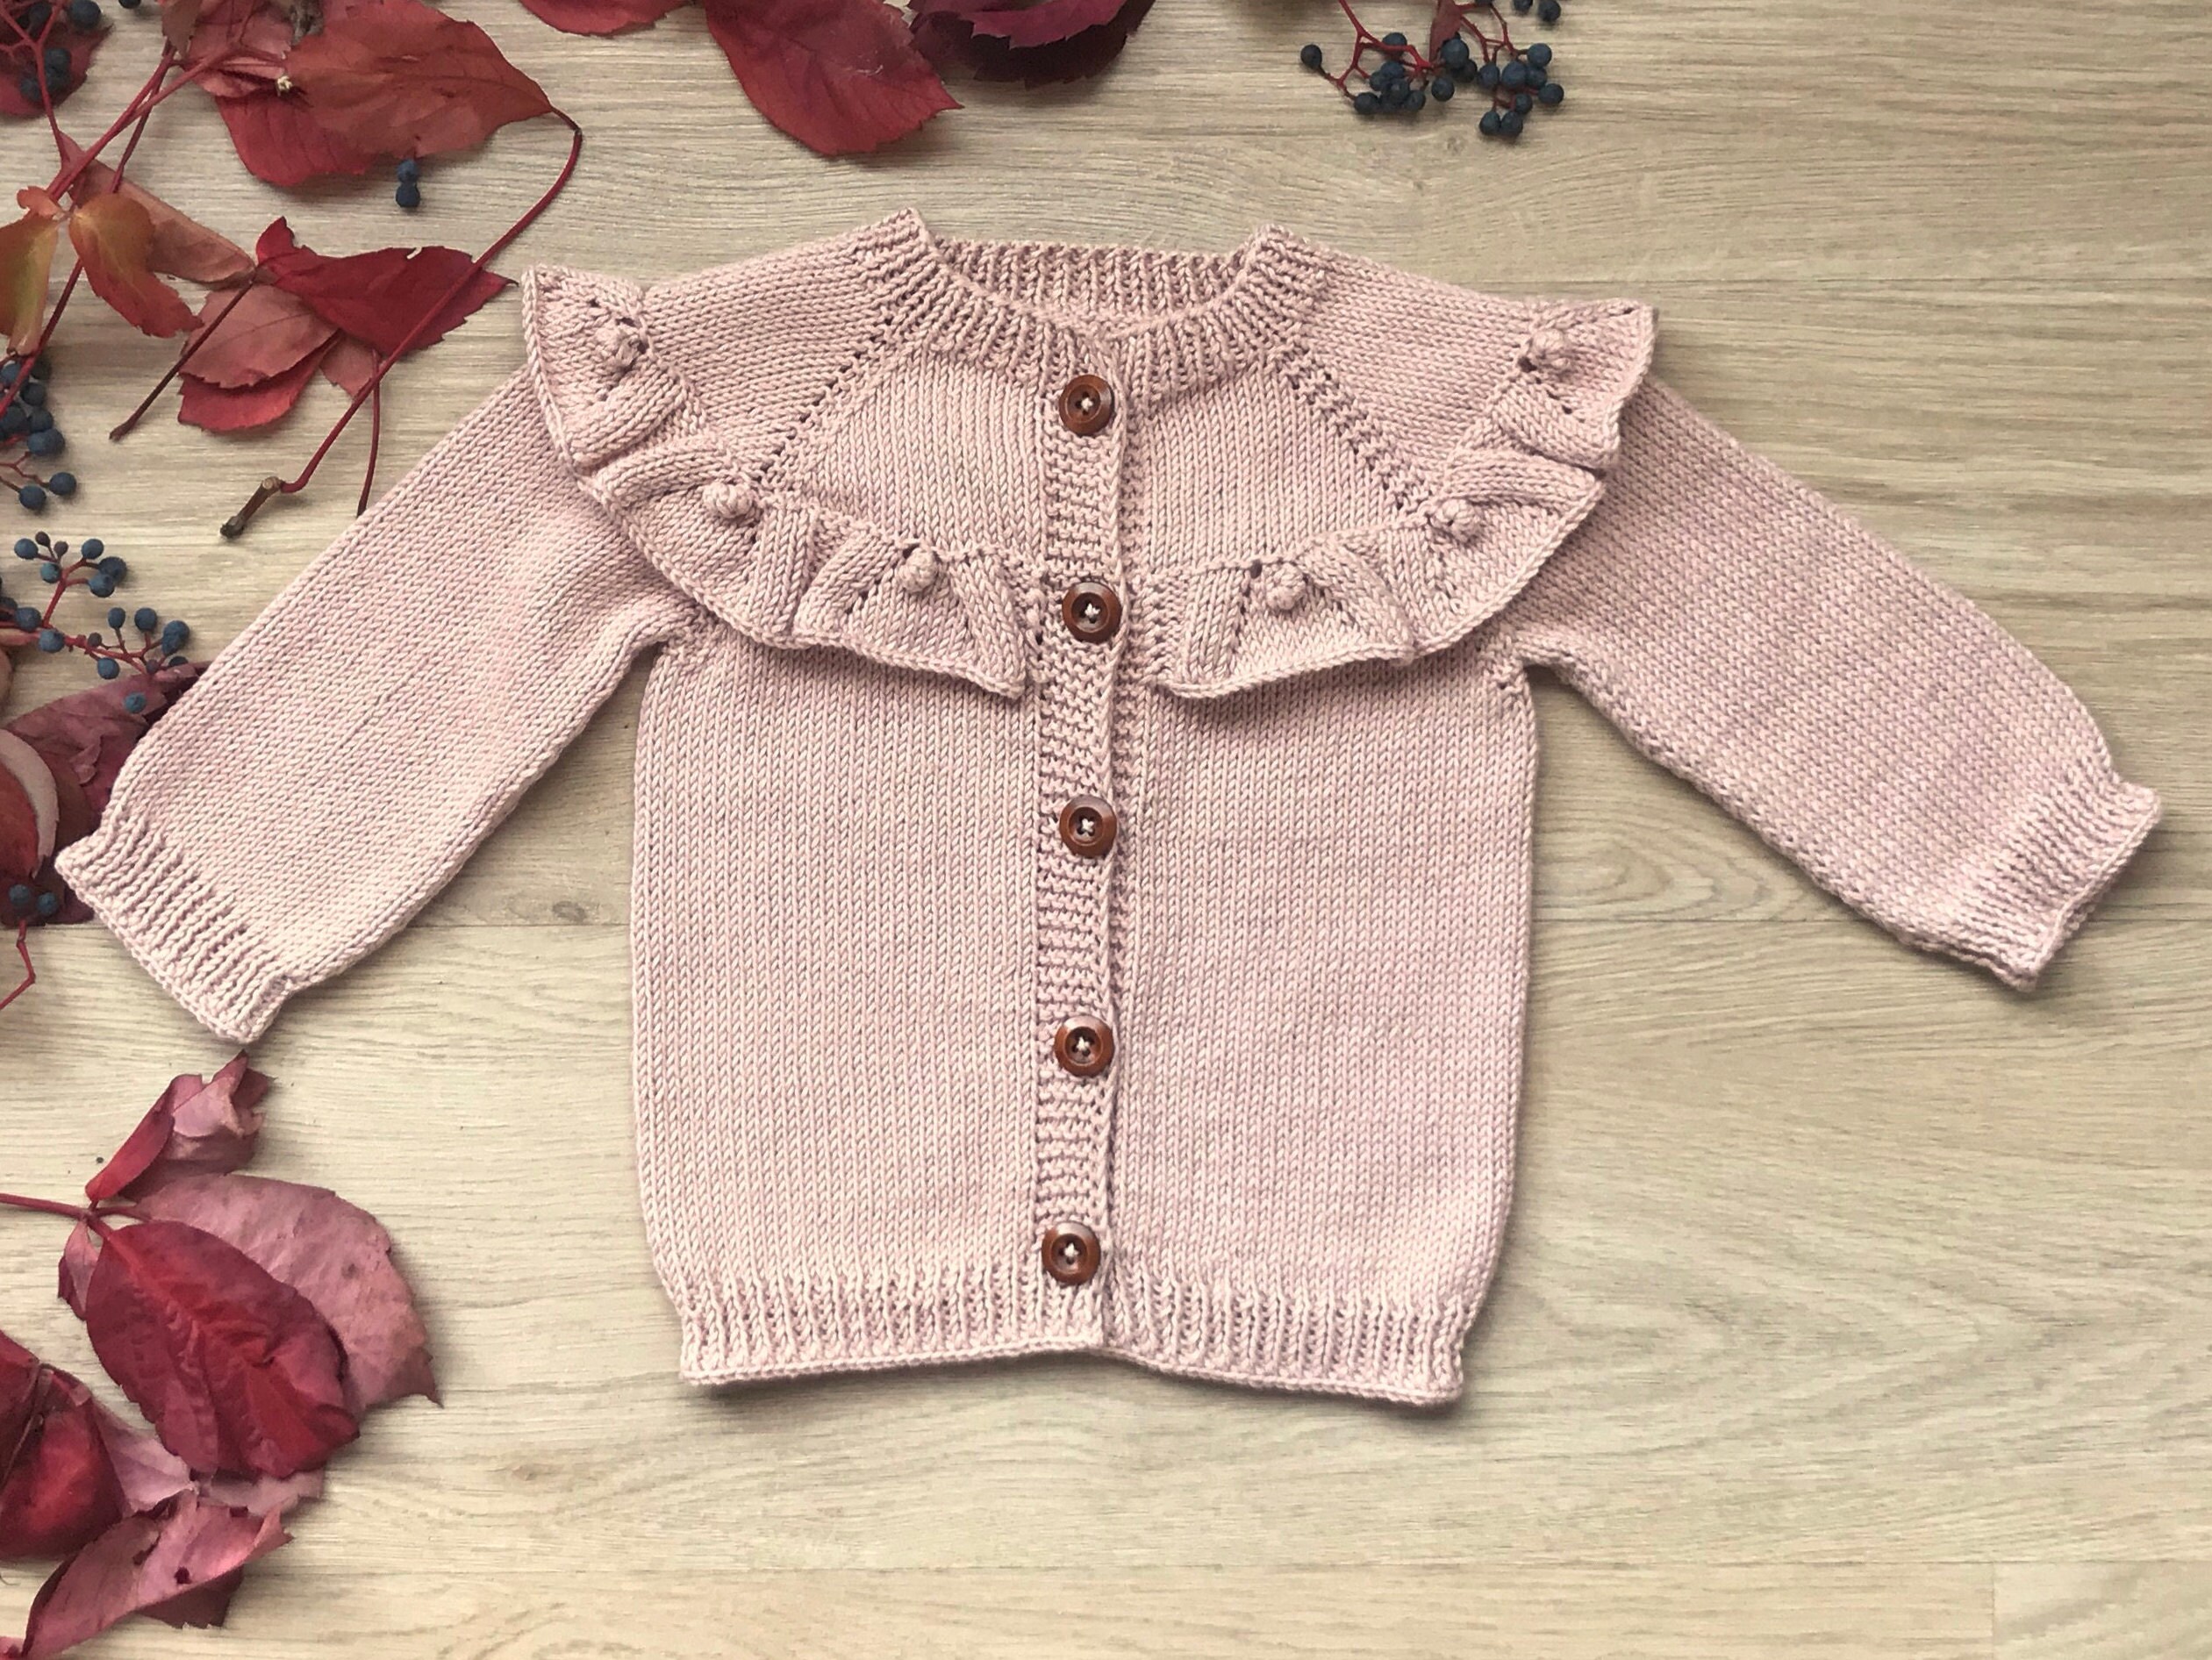 Hand Knitted Organic Baby Cardigan,Hand Knit Baby Sweater Hand Knitted Baby Clothing Organic Unisex Baby Clothes Clothing Unisex Kids Clothing Unisex Baby Clothing Baby Jacket Hand made 